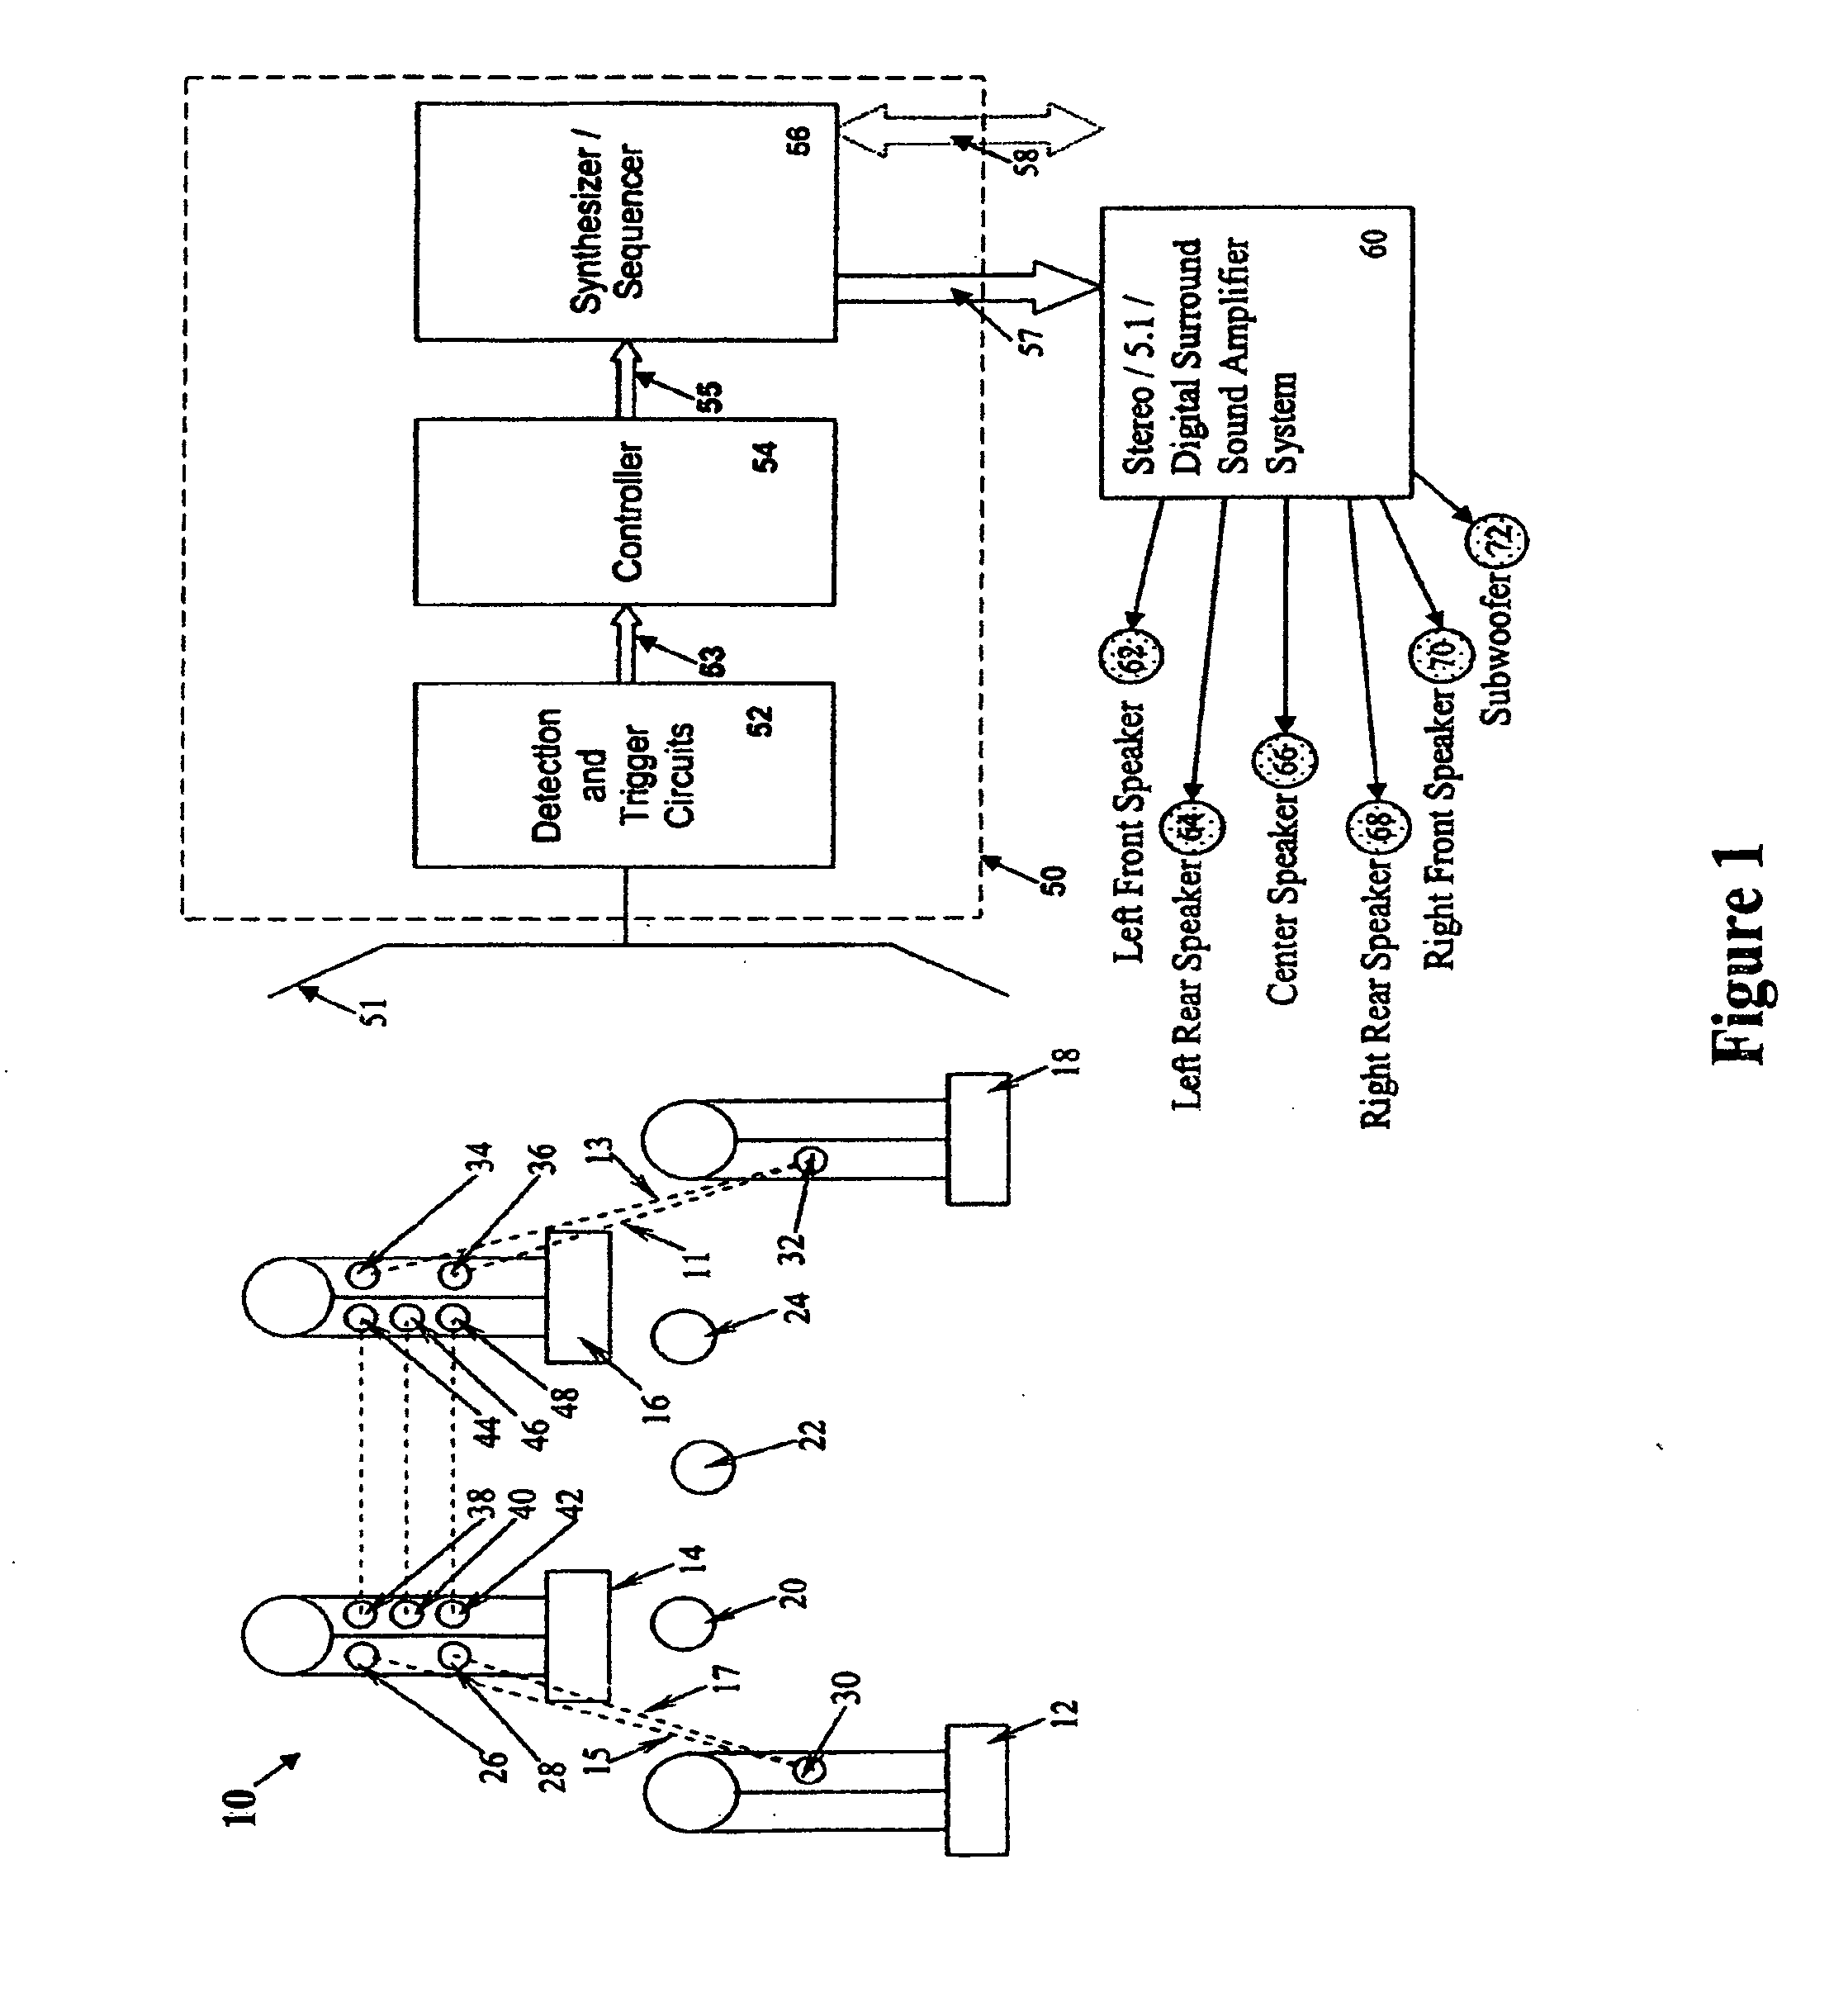 Multi-media device enabling a user to play audio content in association with displayed video